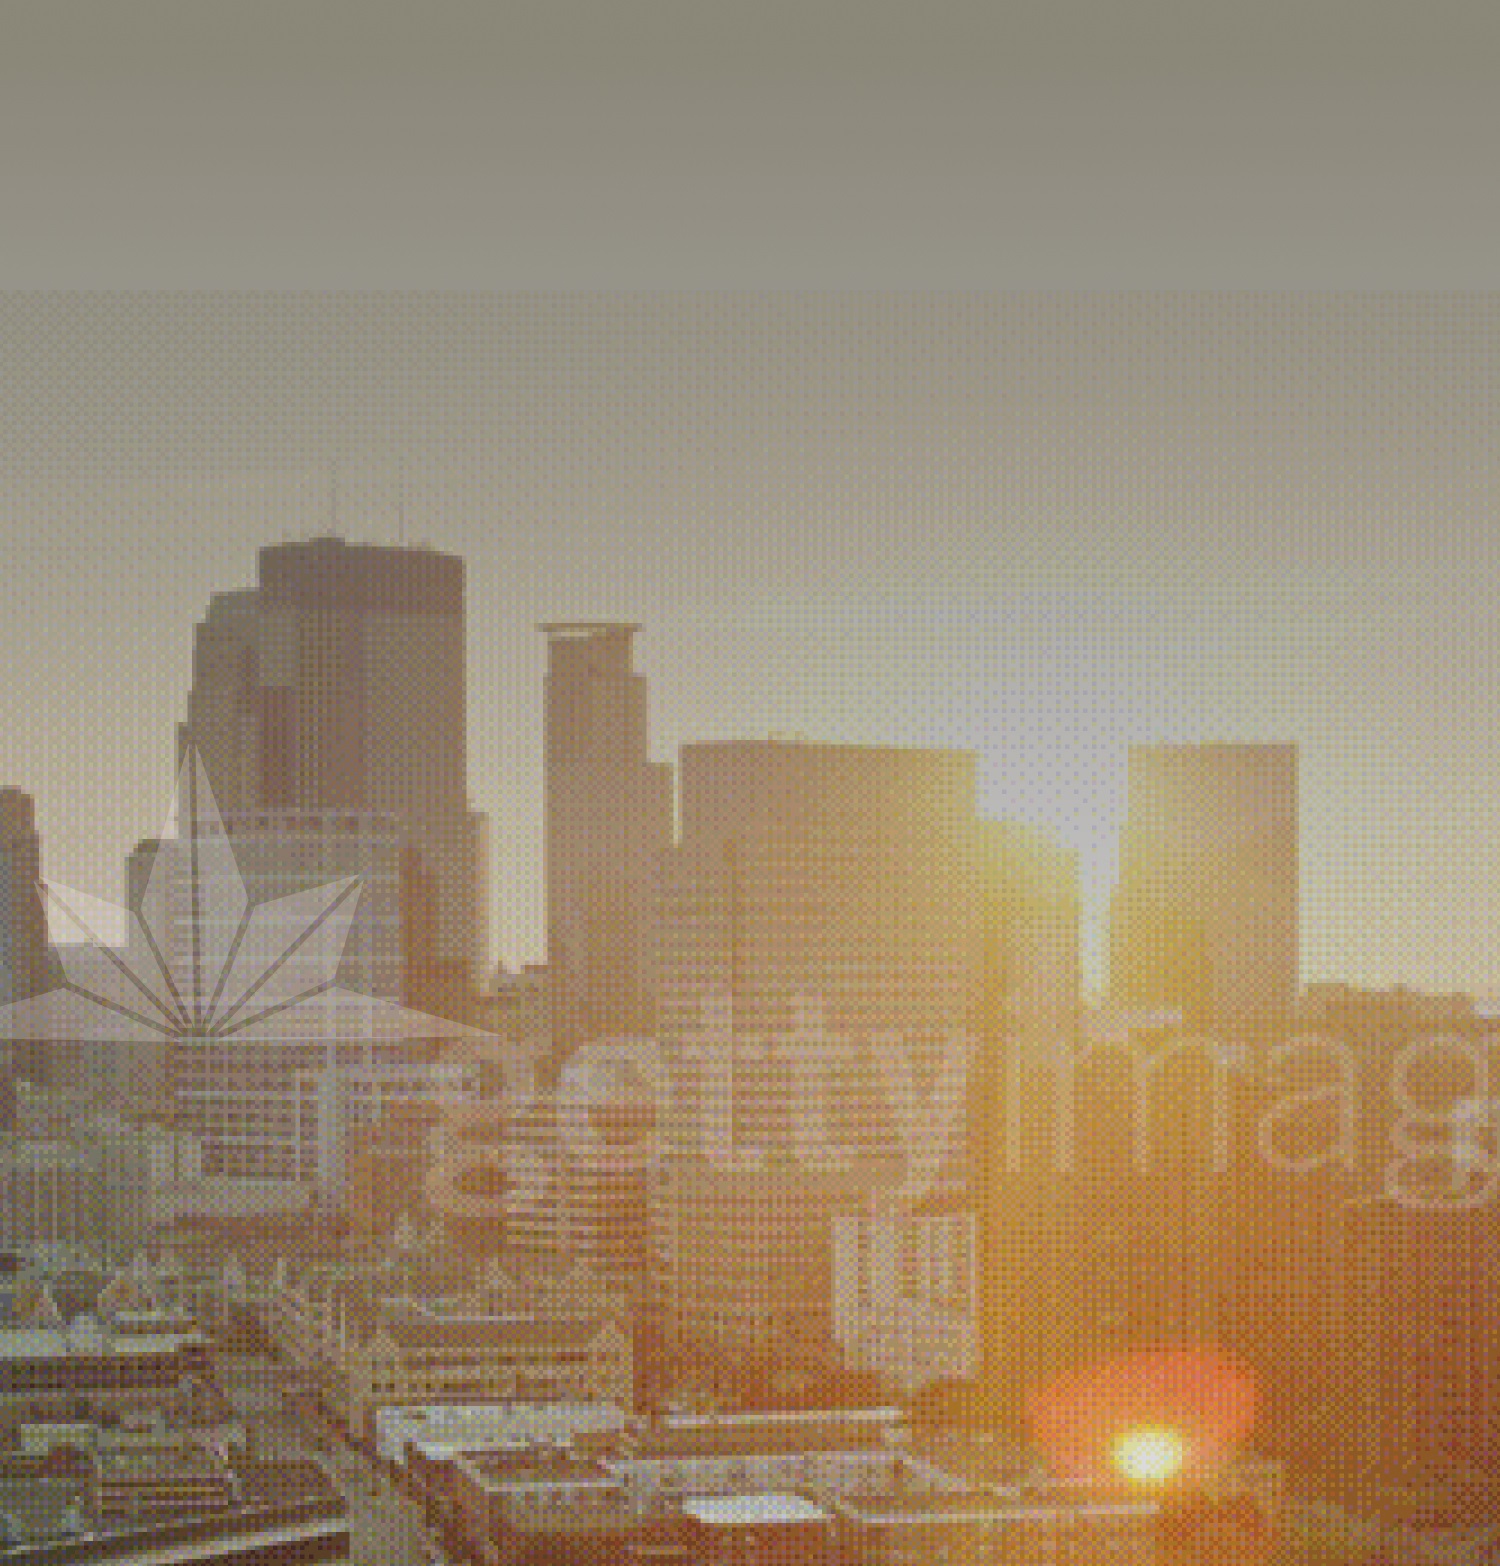 City sun rise view | Find Out Your Net Worth With Our Free Modular Planning Tool